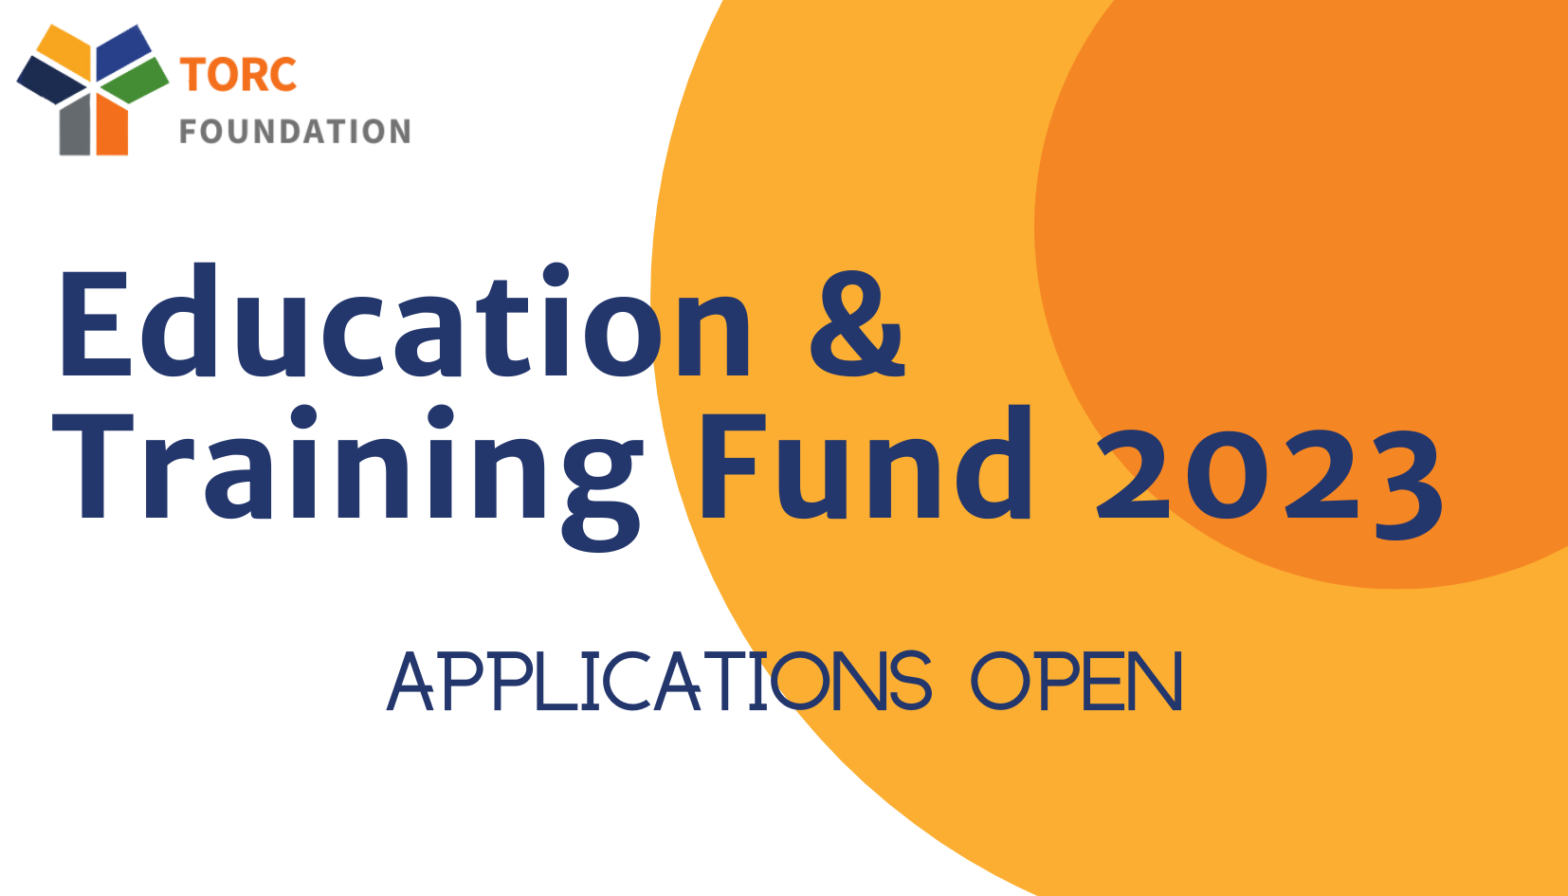 TORC Foundation Education & Training Fund launch banner